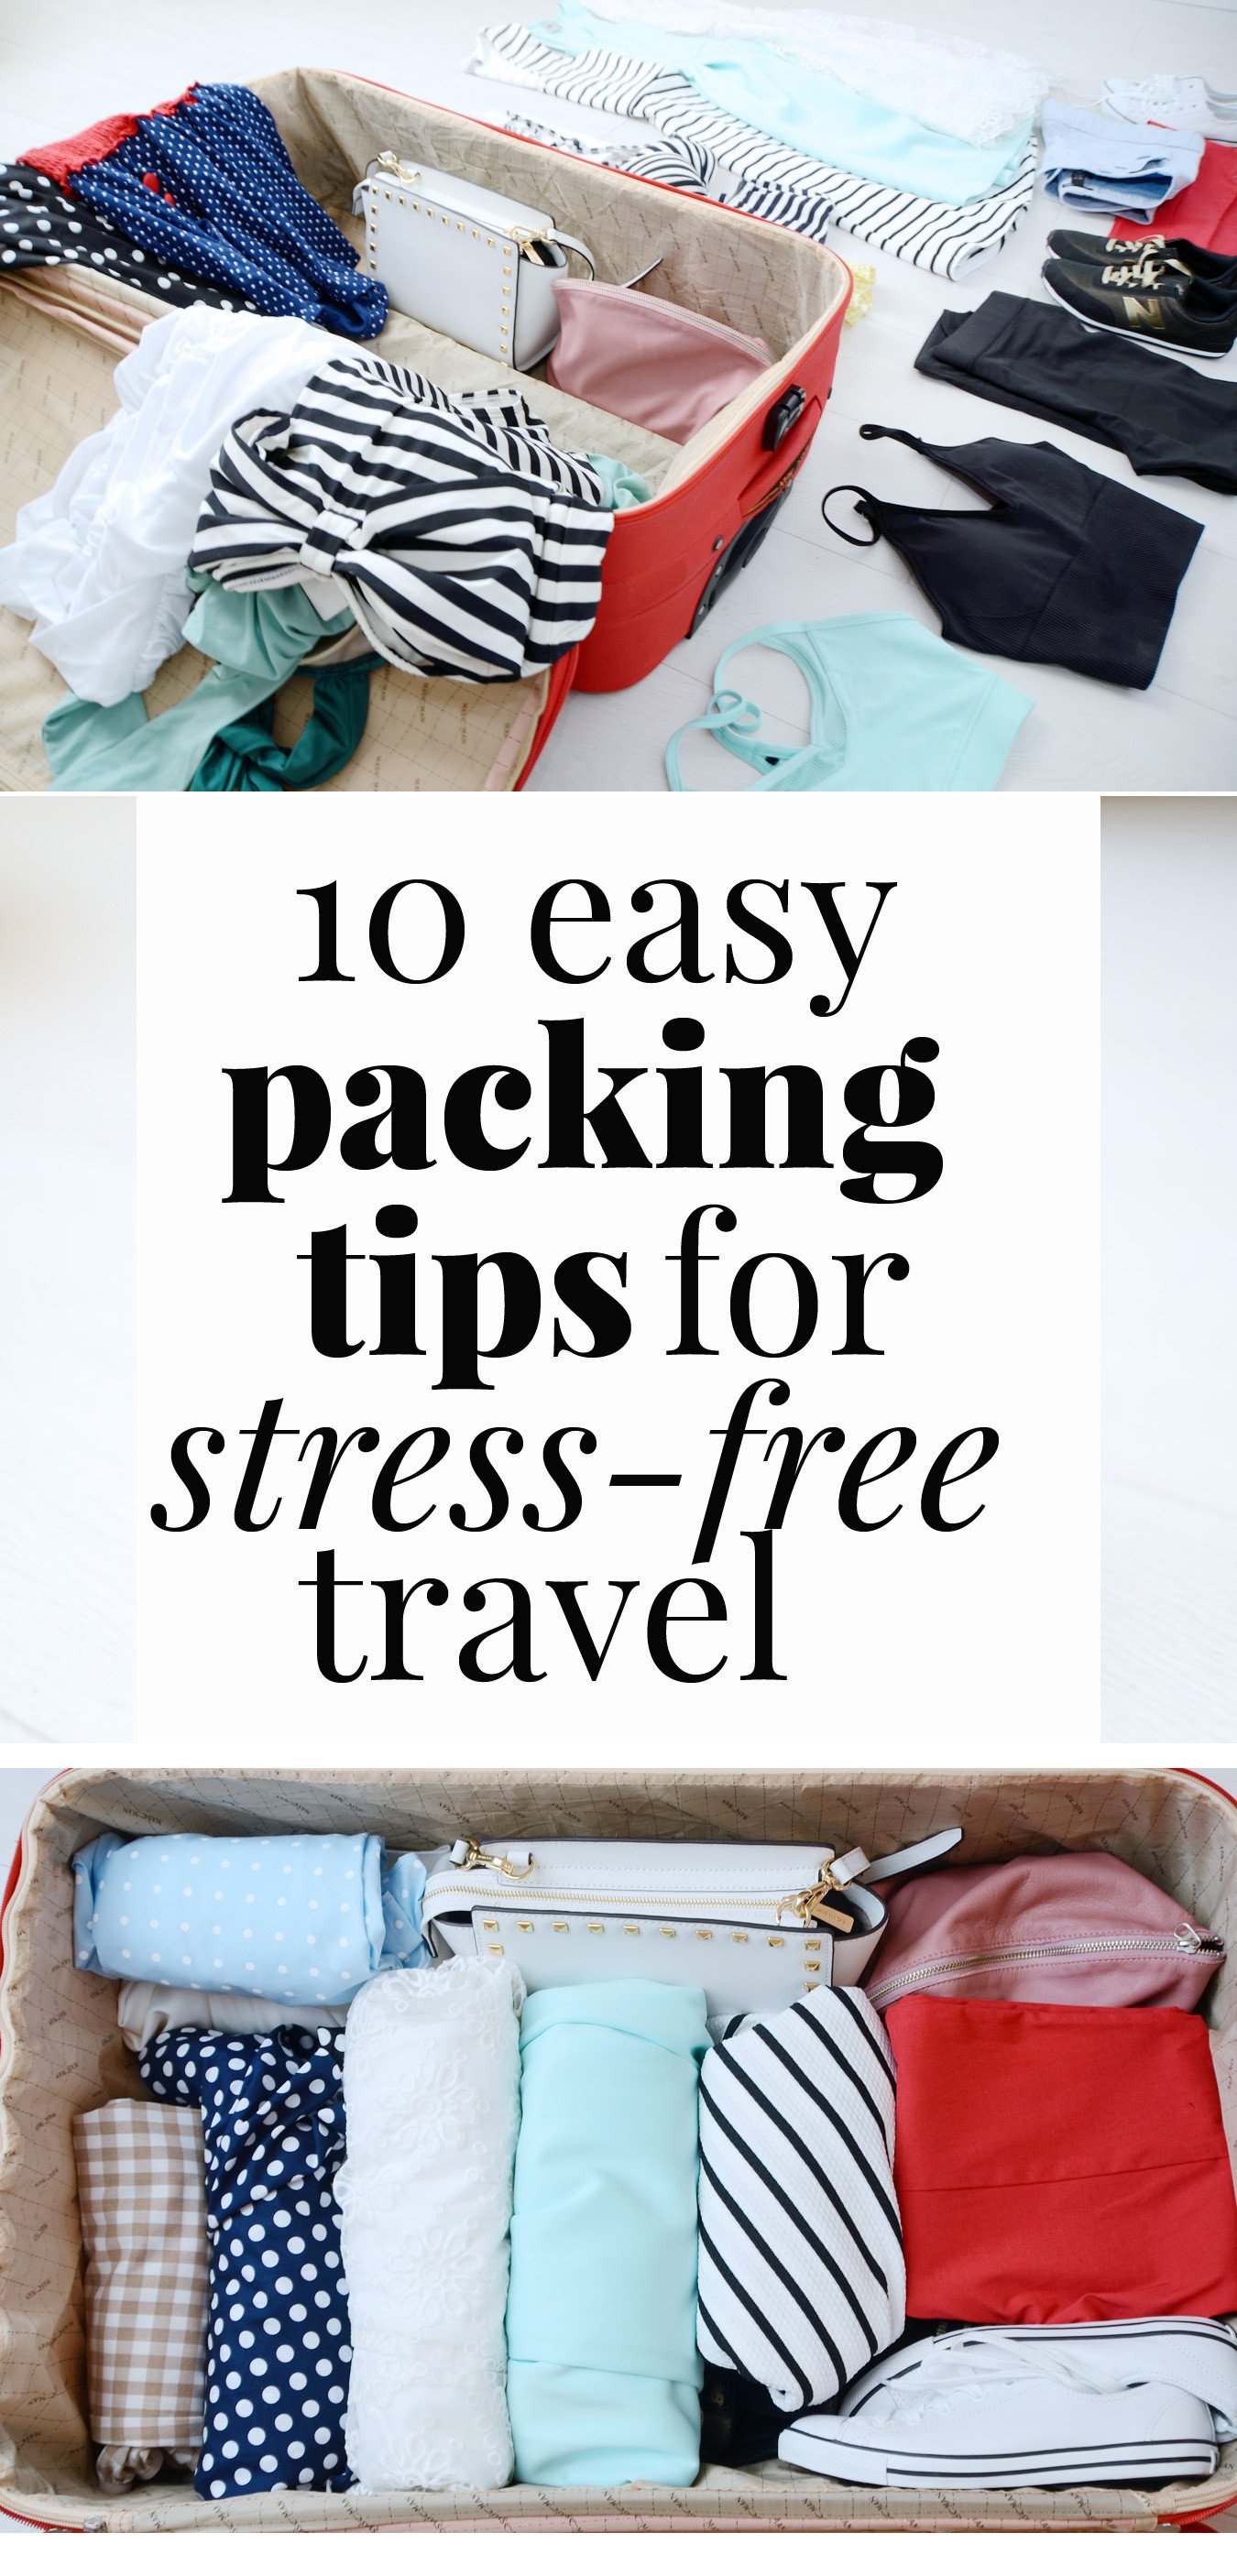 10 easy packing tips for stress-free travel